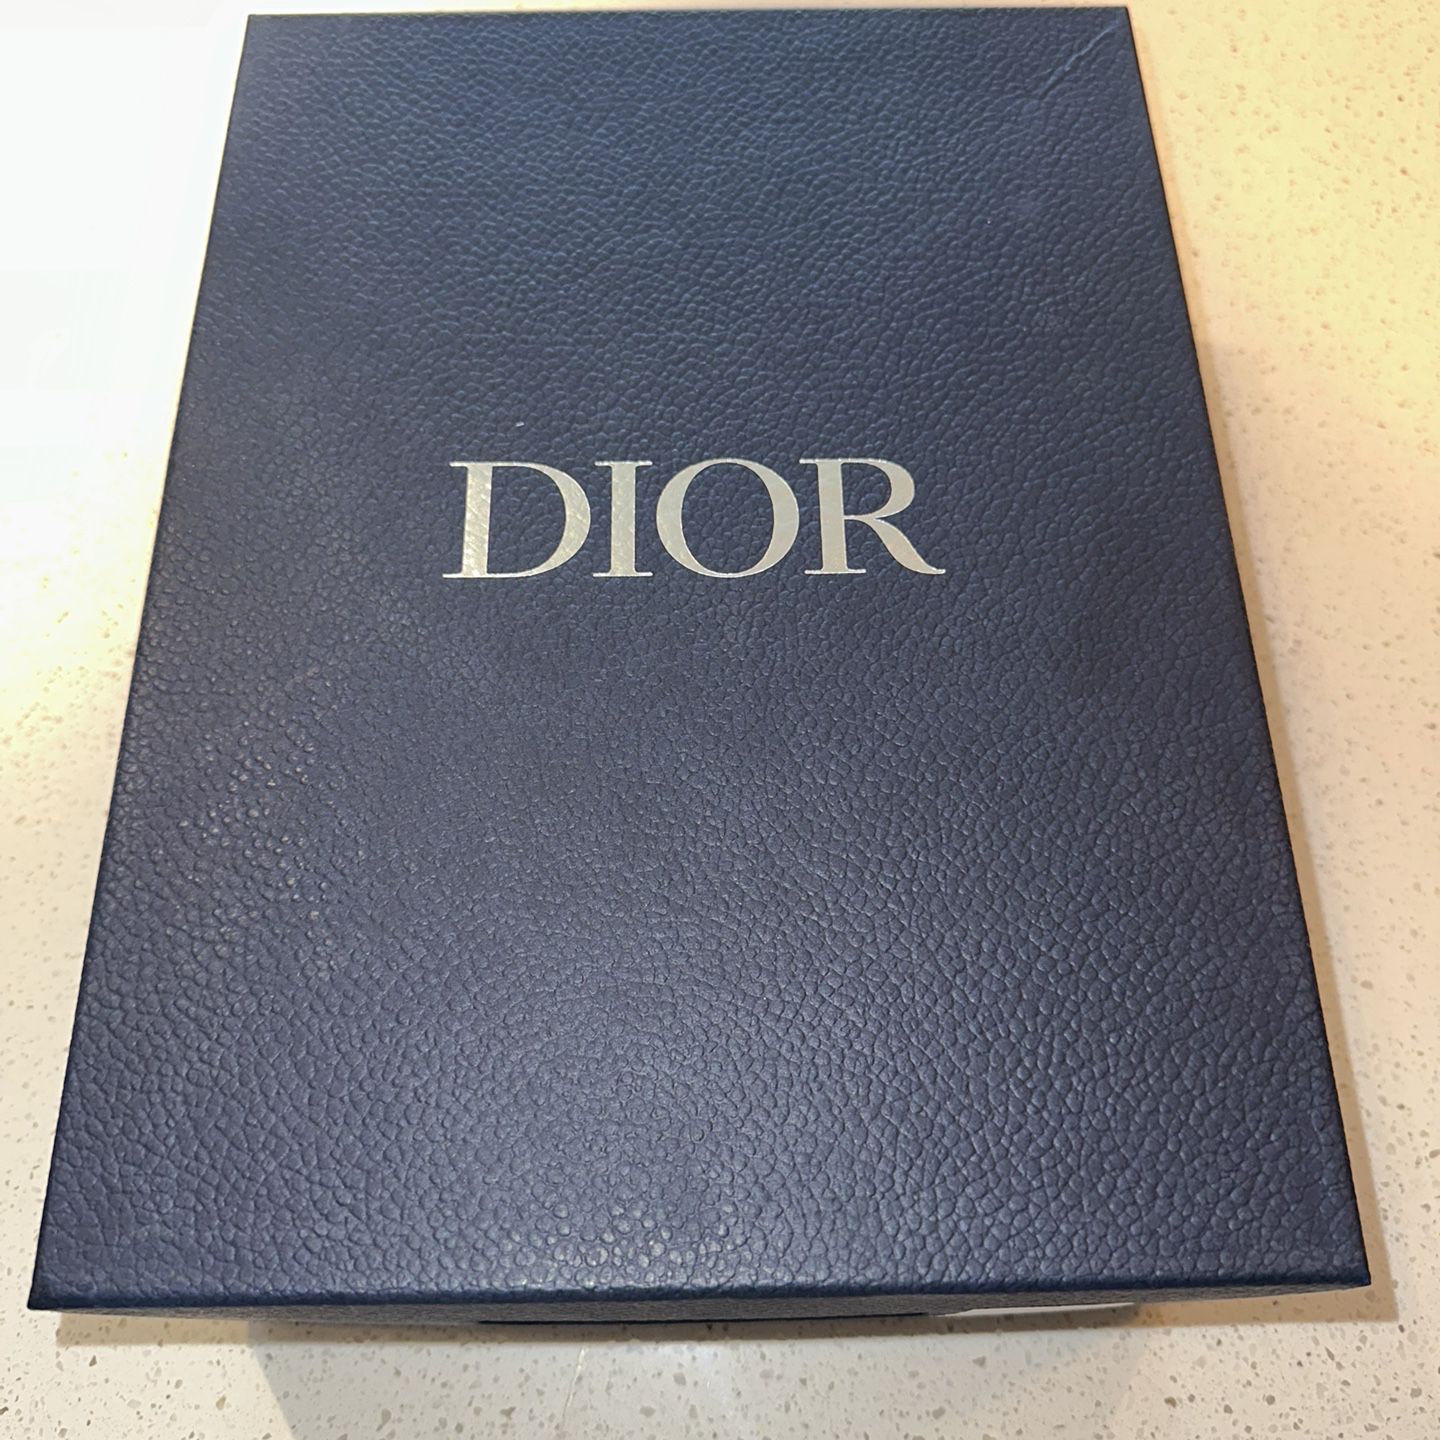 Dior B22 Signature Print Shoes for Sale in Orlando, FL - OfferUp